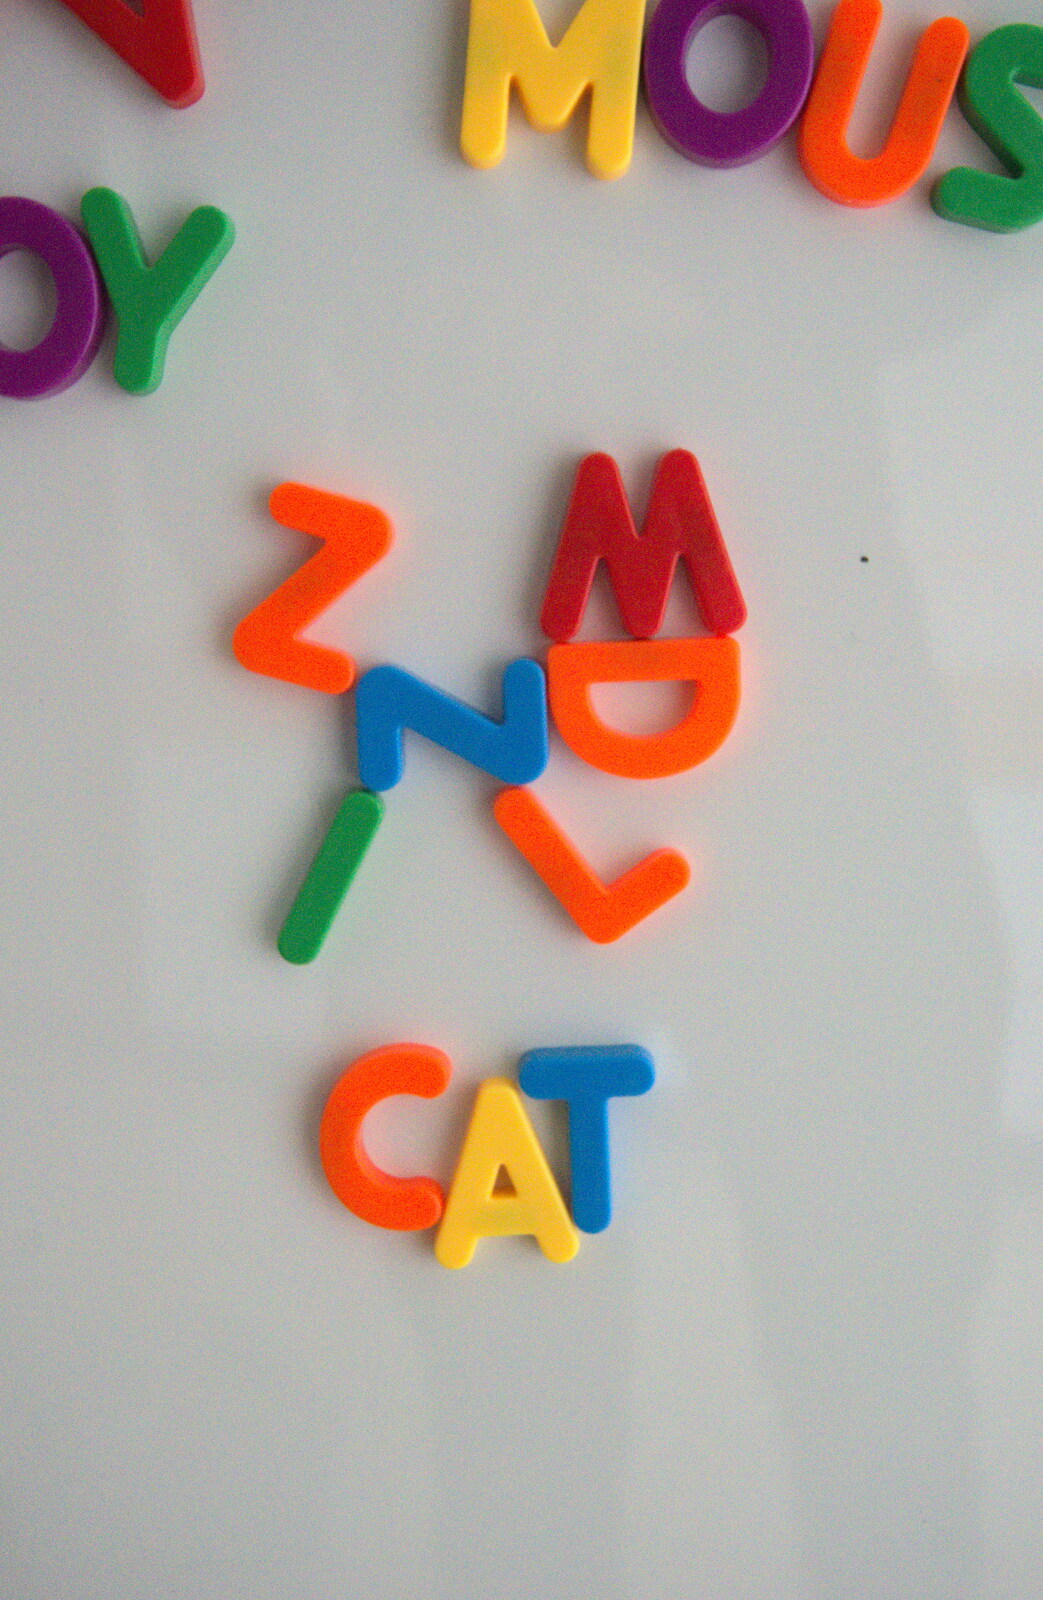 Luna has been creative with some fridge magnets from The Open Education Challenge, Barcelona, Catalonia - 13th July 2014